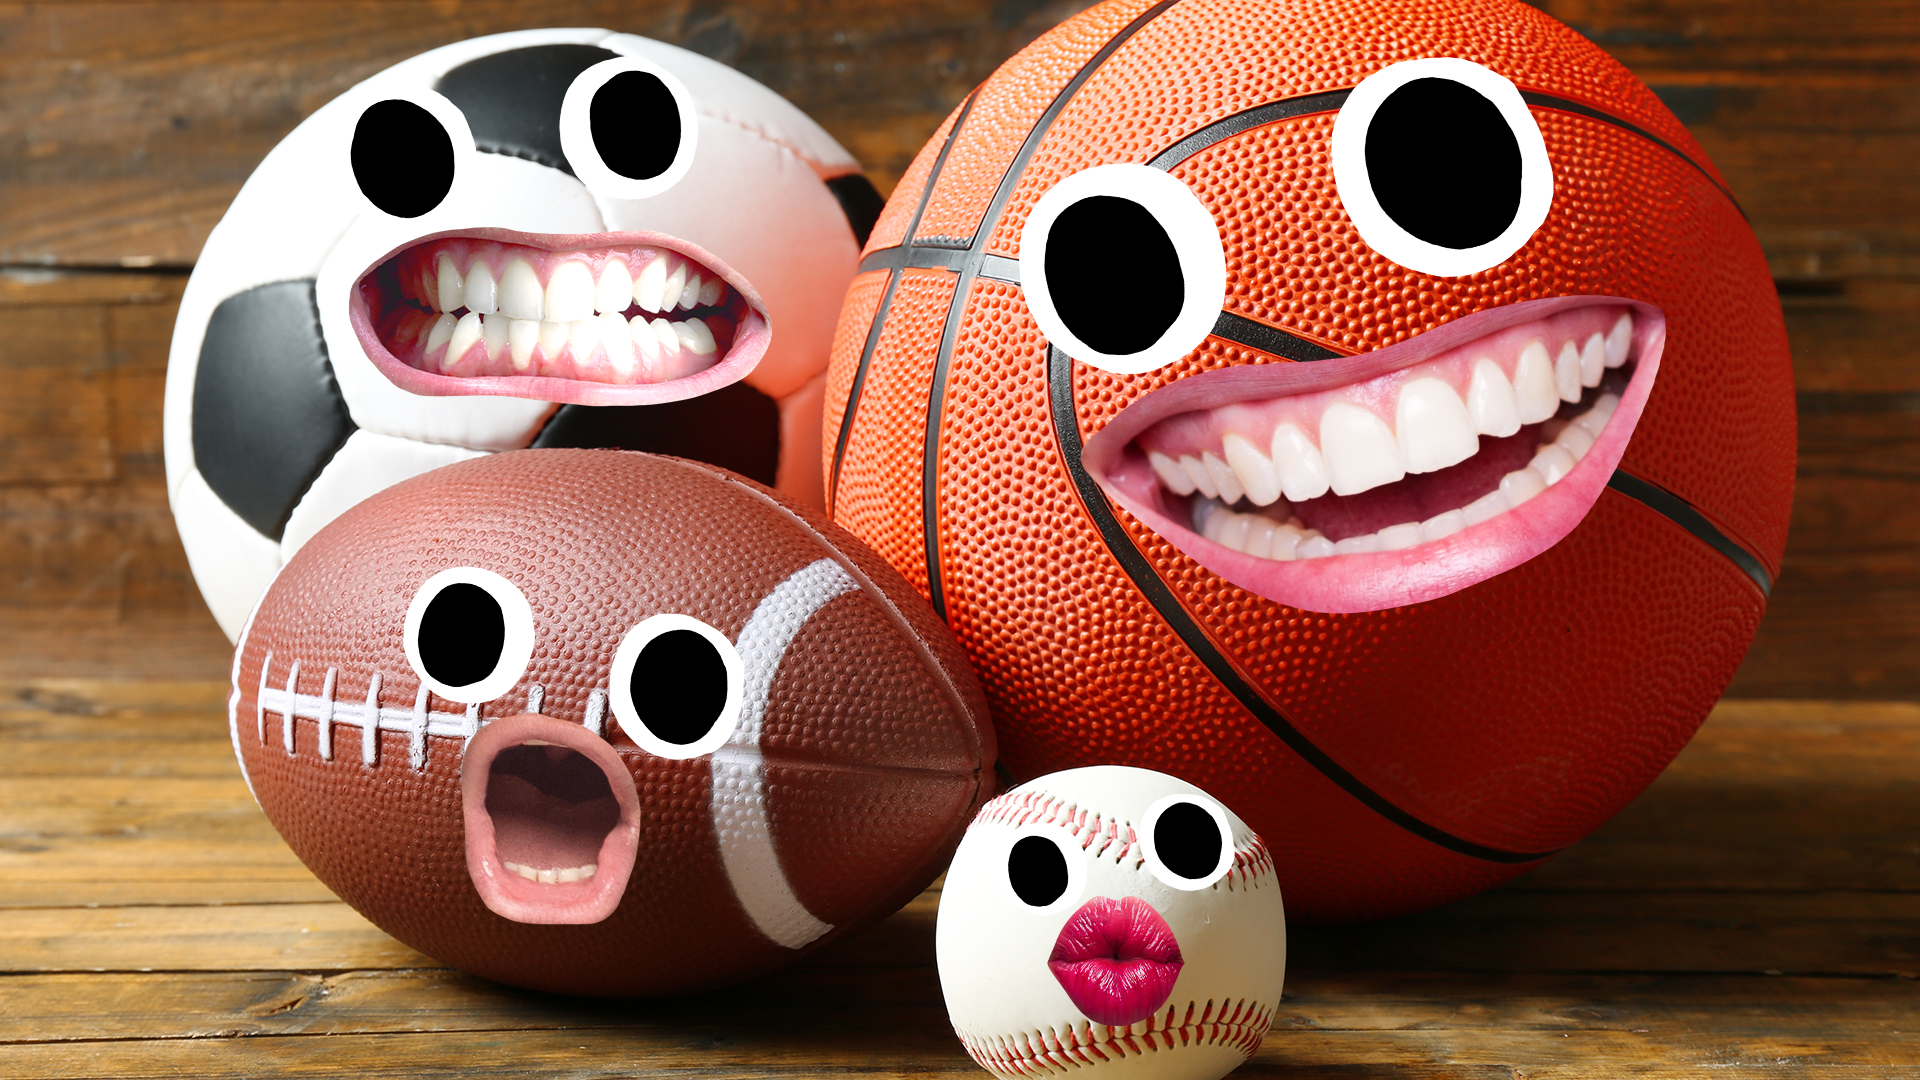 Sports balls with goofy faces